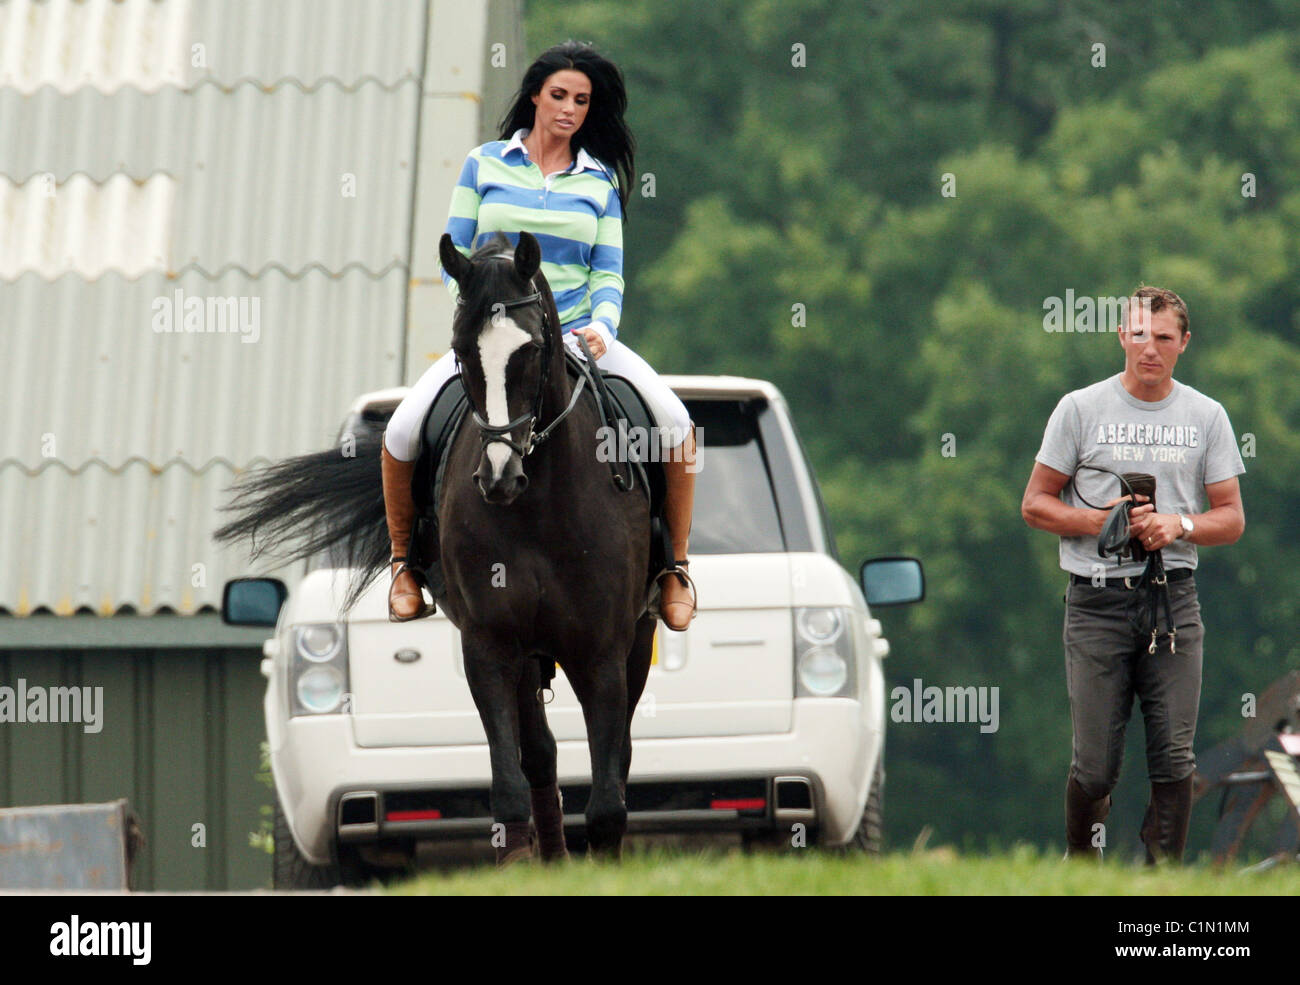 Katie Price aka Jordan riding her horse at the stables with her riding  instructor Andrew Gould East Sussex, England - 26.06.09 Stock Photo - Alamy